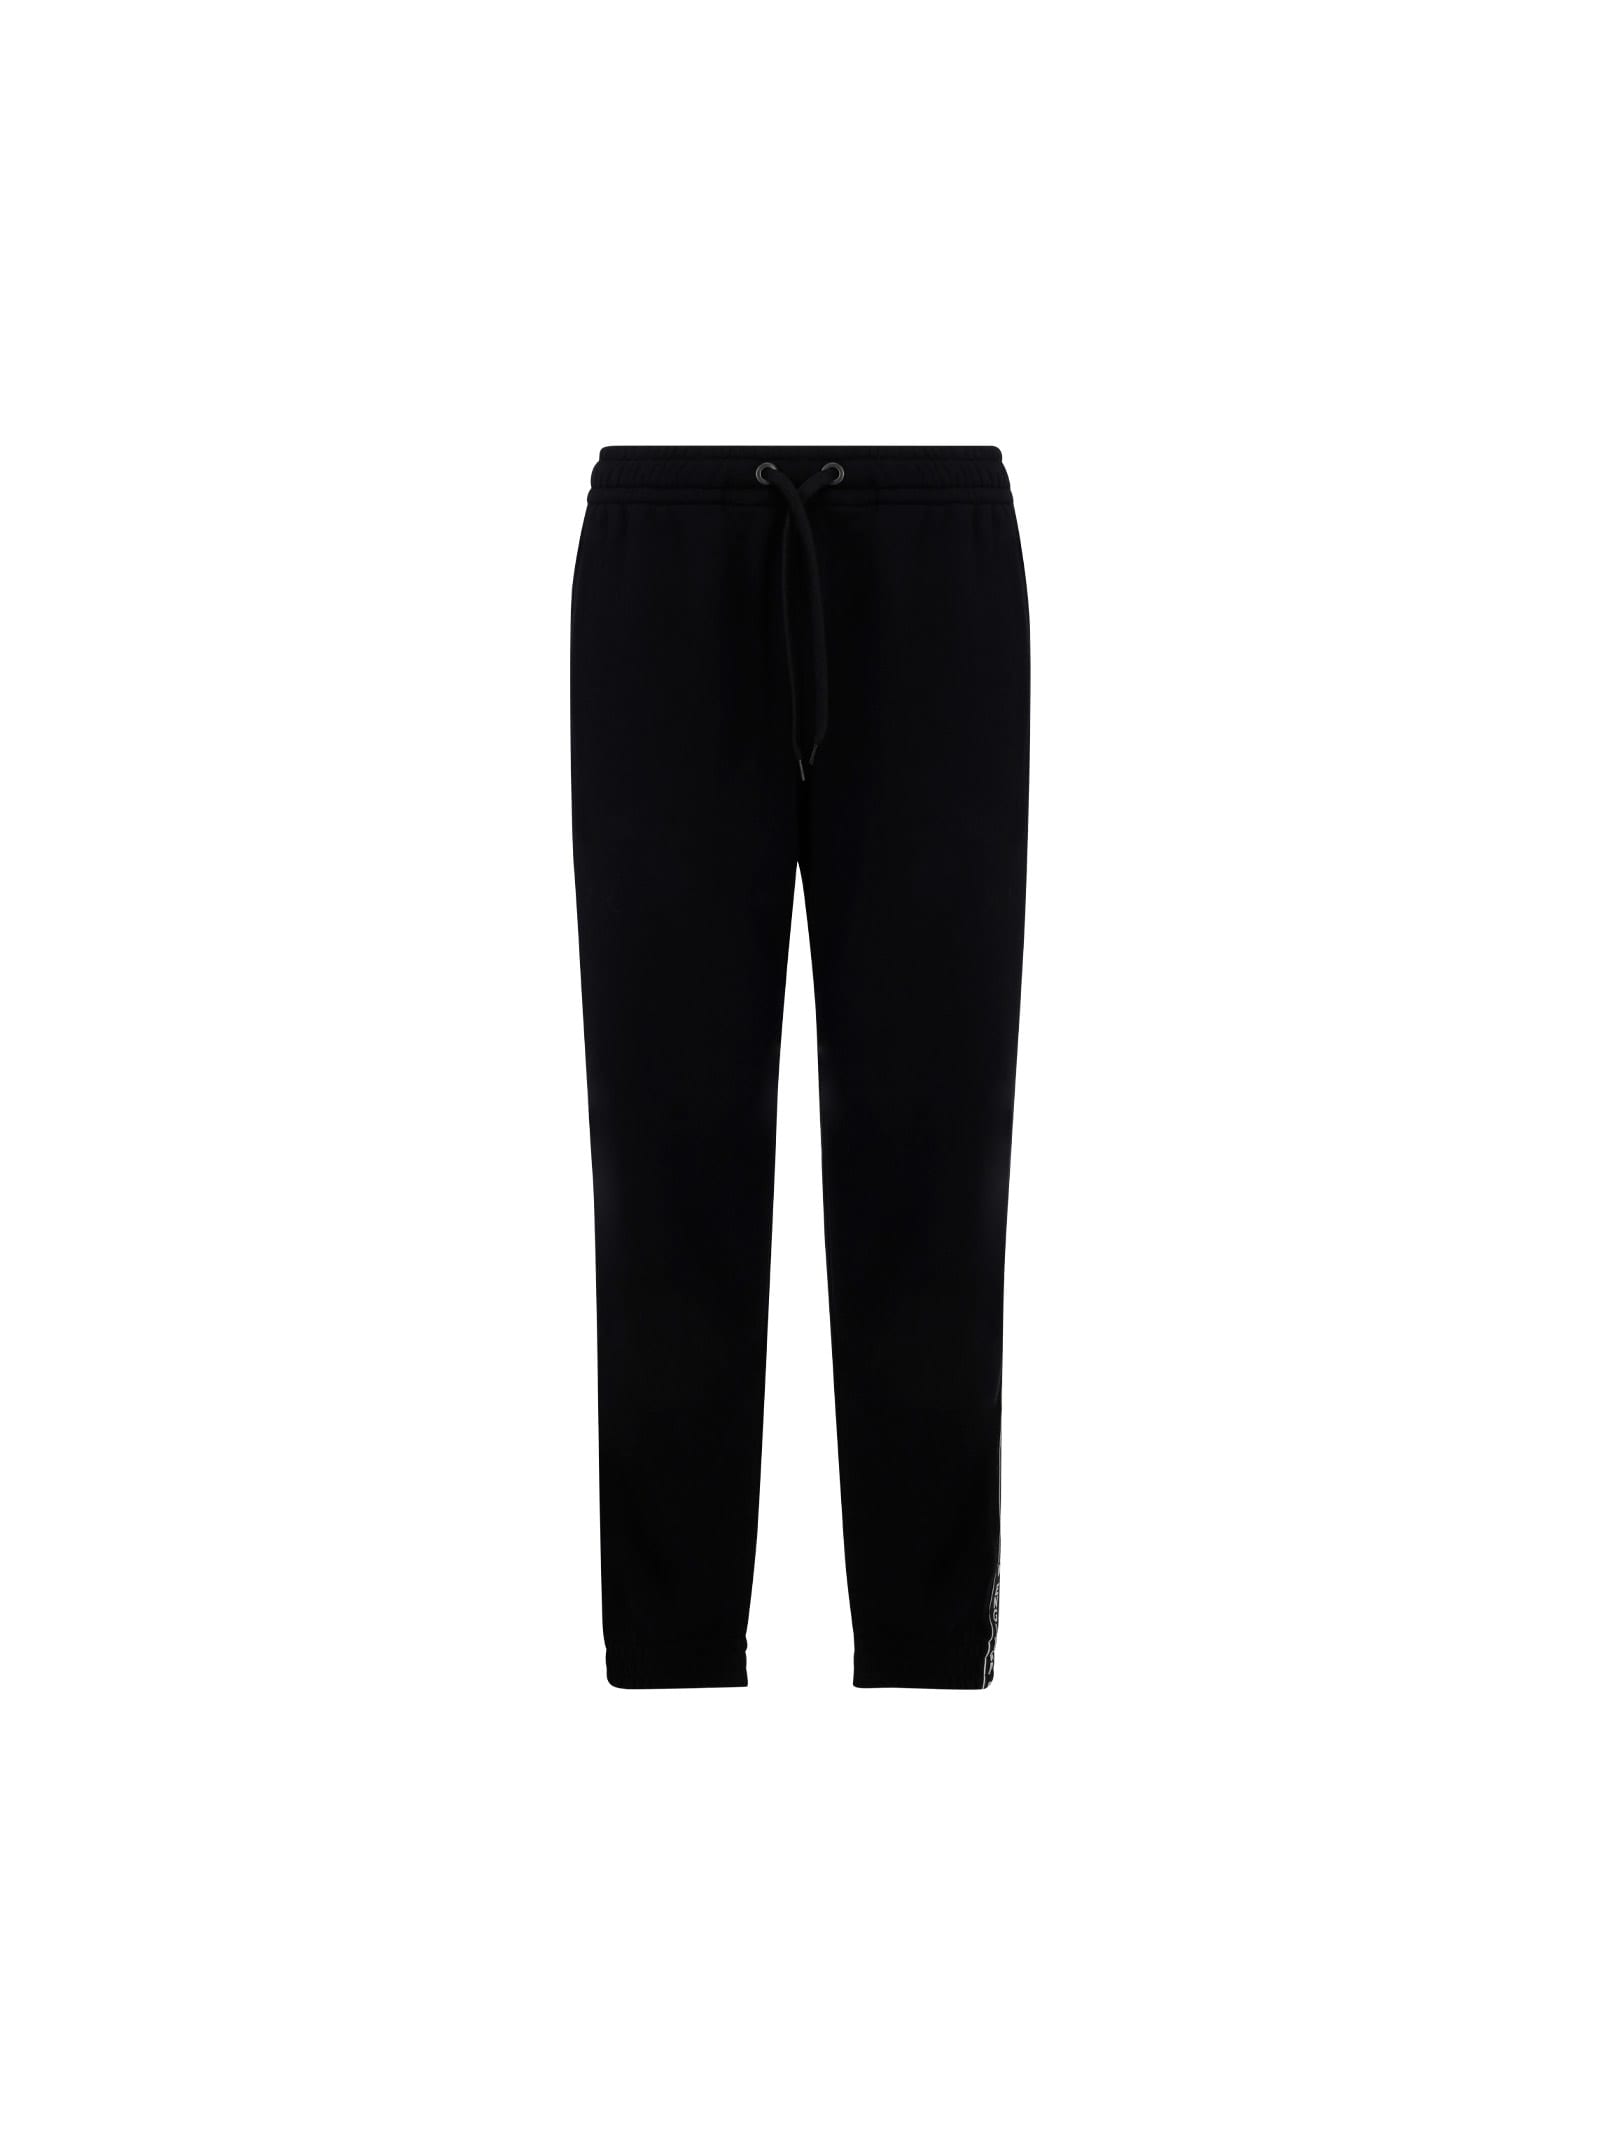 BURBERRY SWEATtrousers,11521501